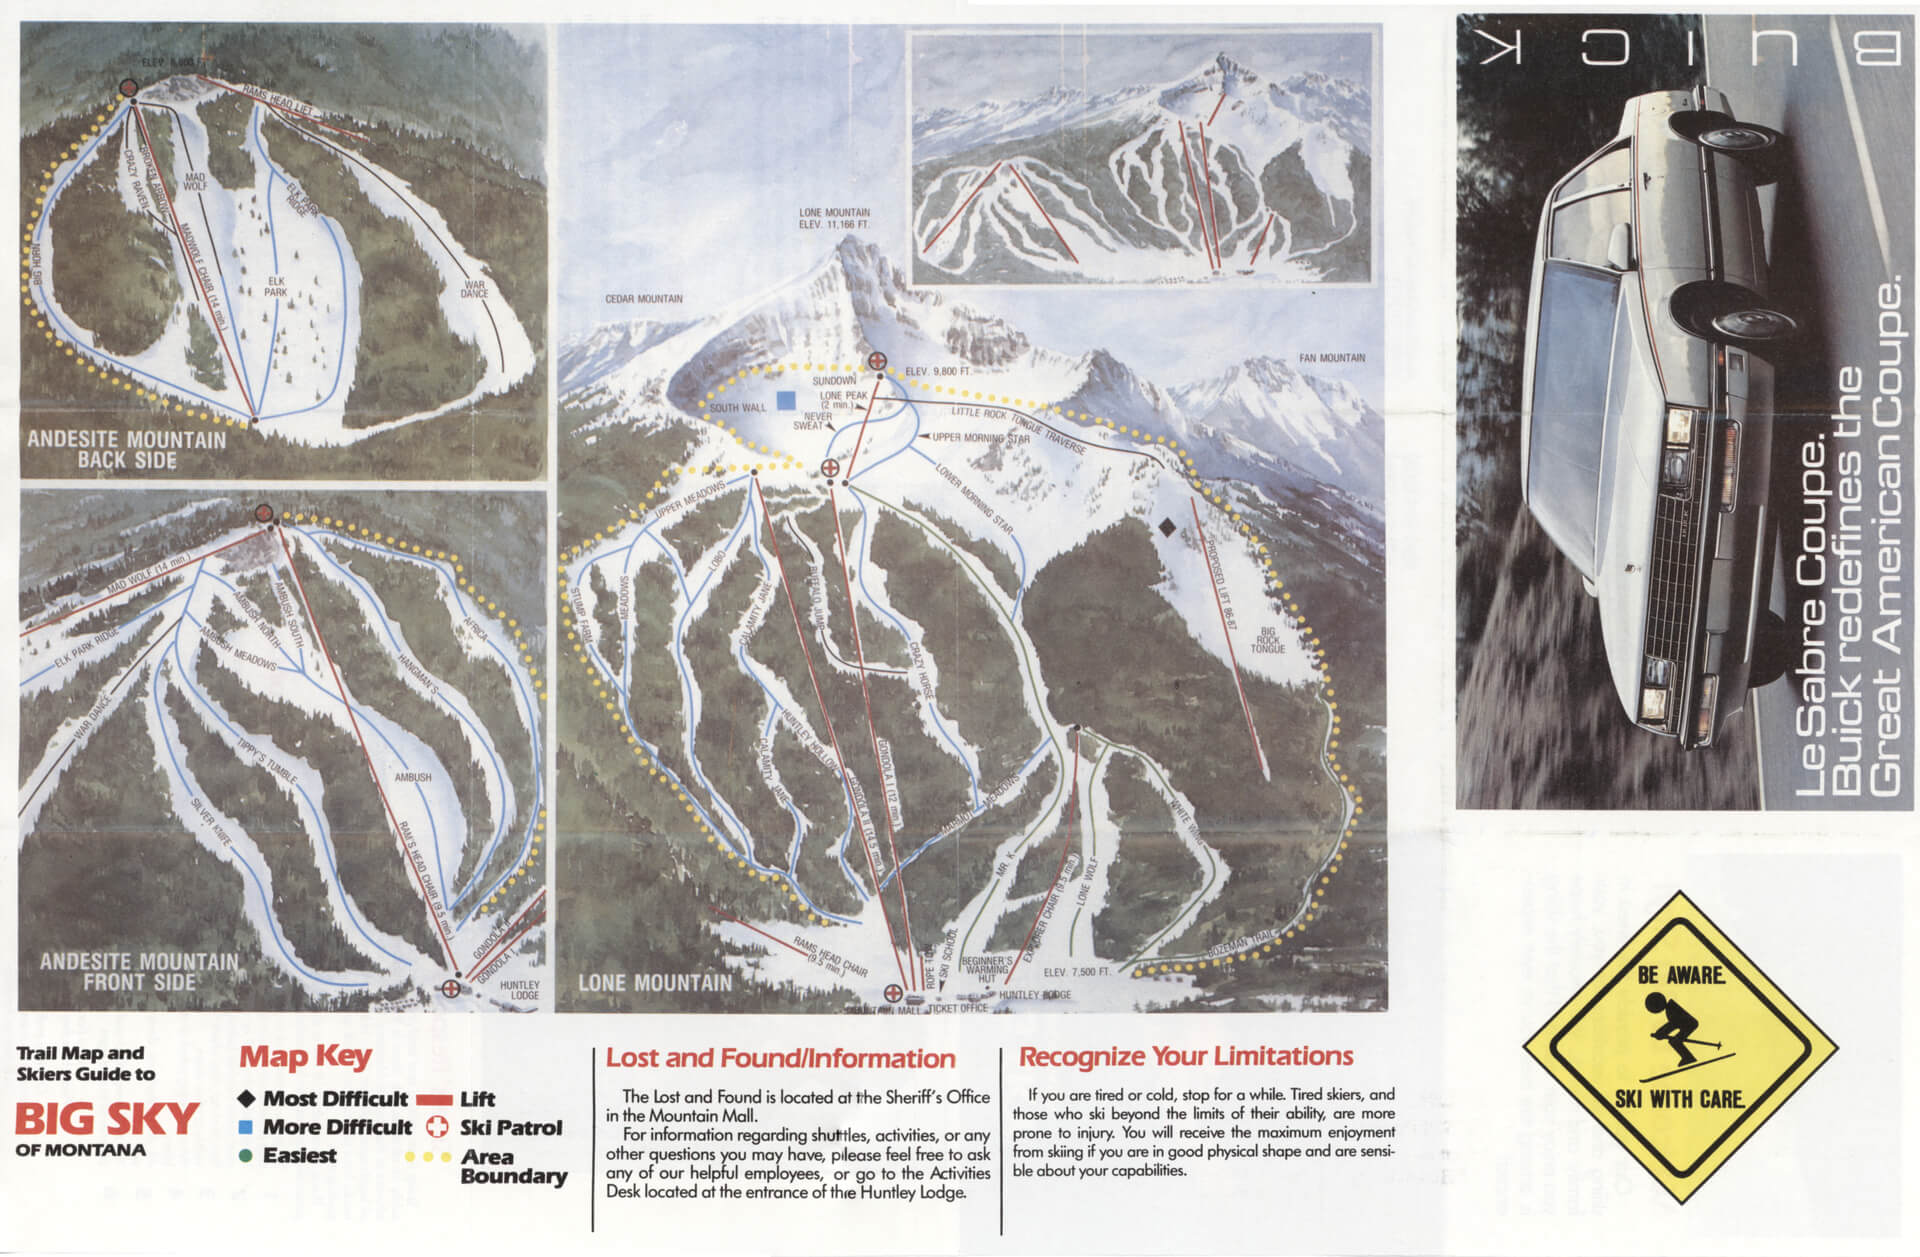 Big Sky Trail Map from 1984